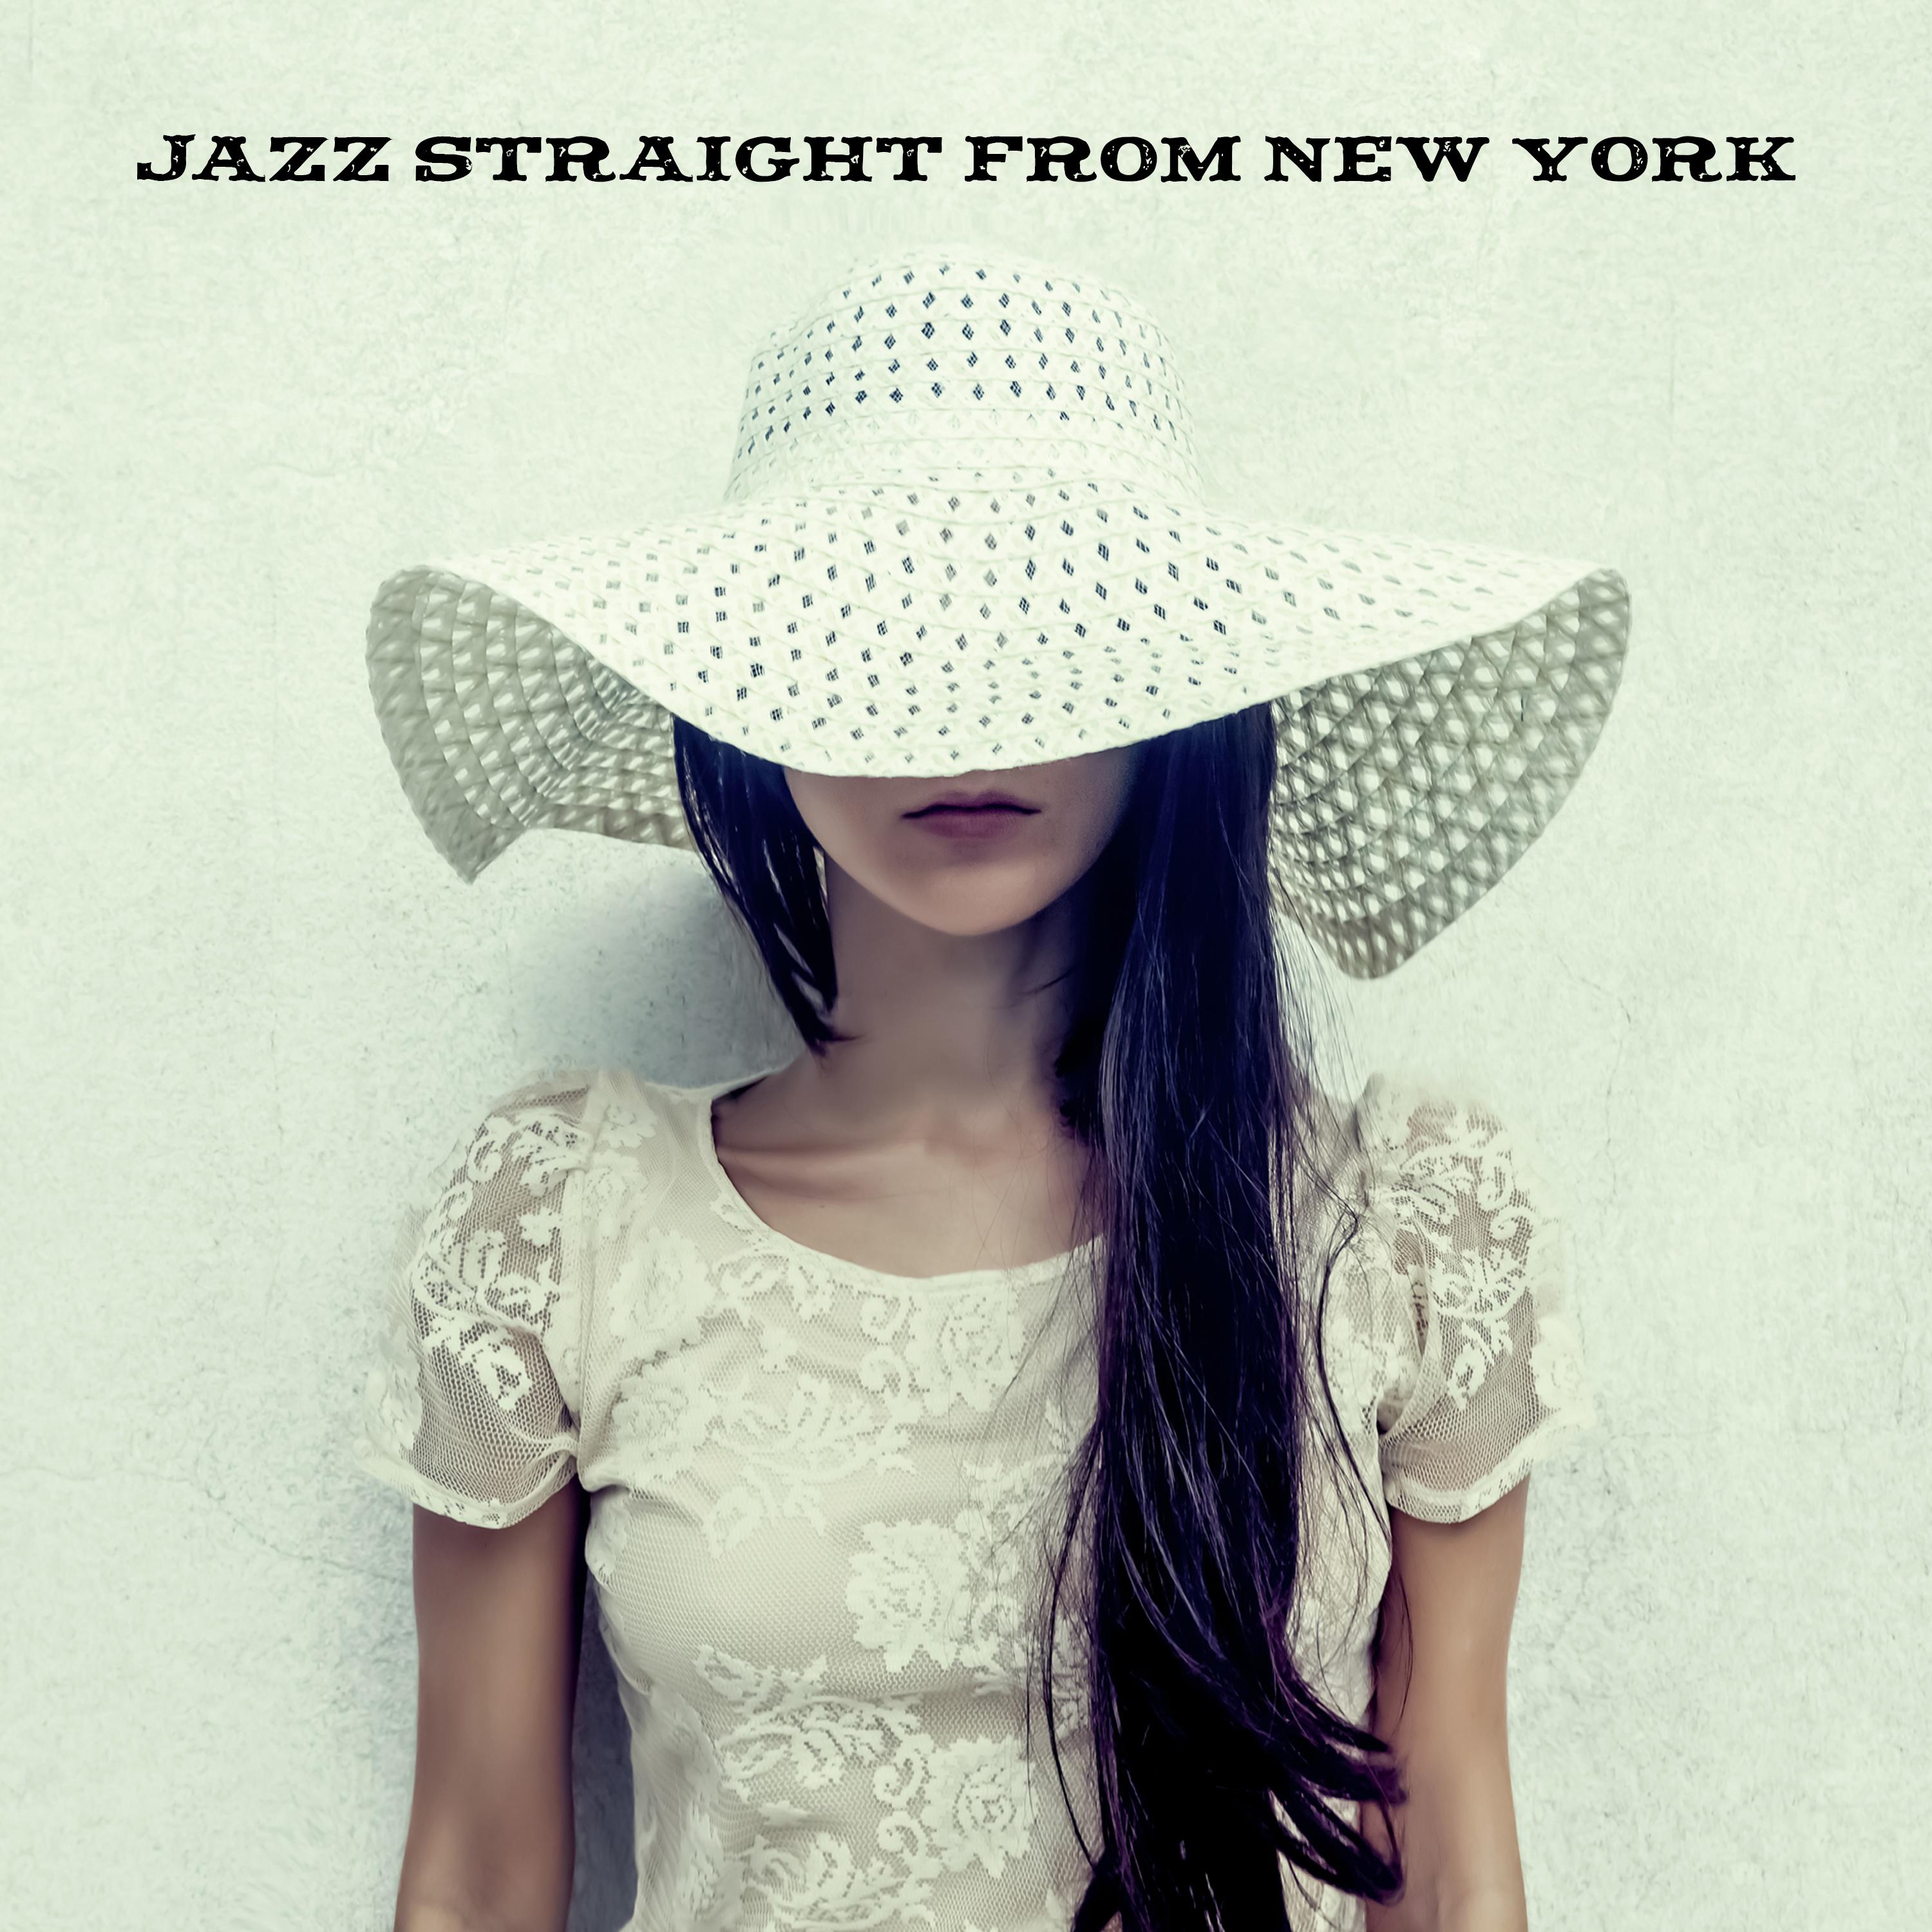 Jazz Straight from New York – 2019 Instrumental Smooth Jazz Music Compilation, Vintage Melodies Played on Piano, Contrabass, Sax & Many More